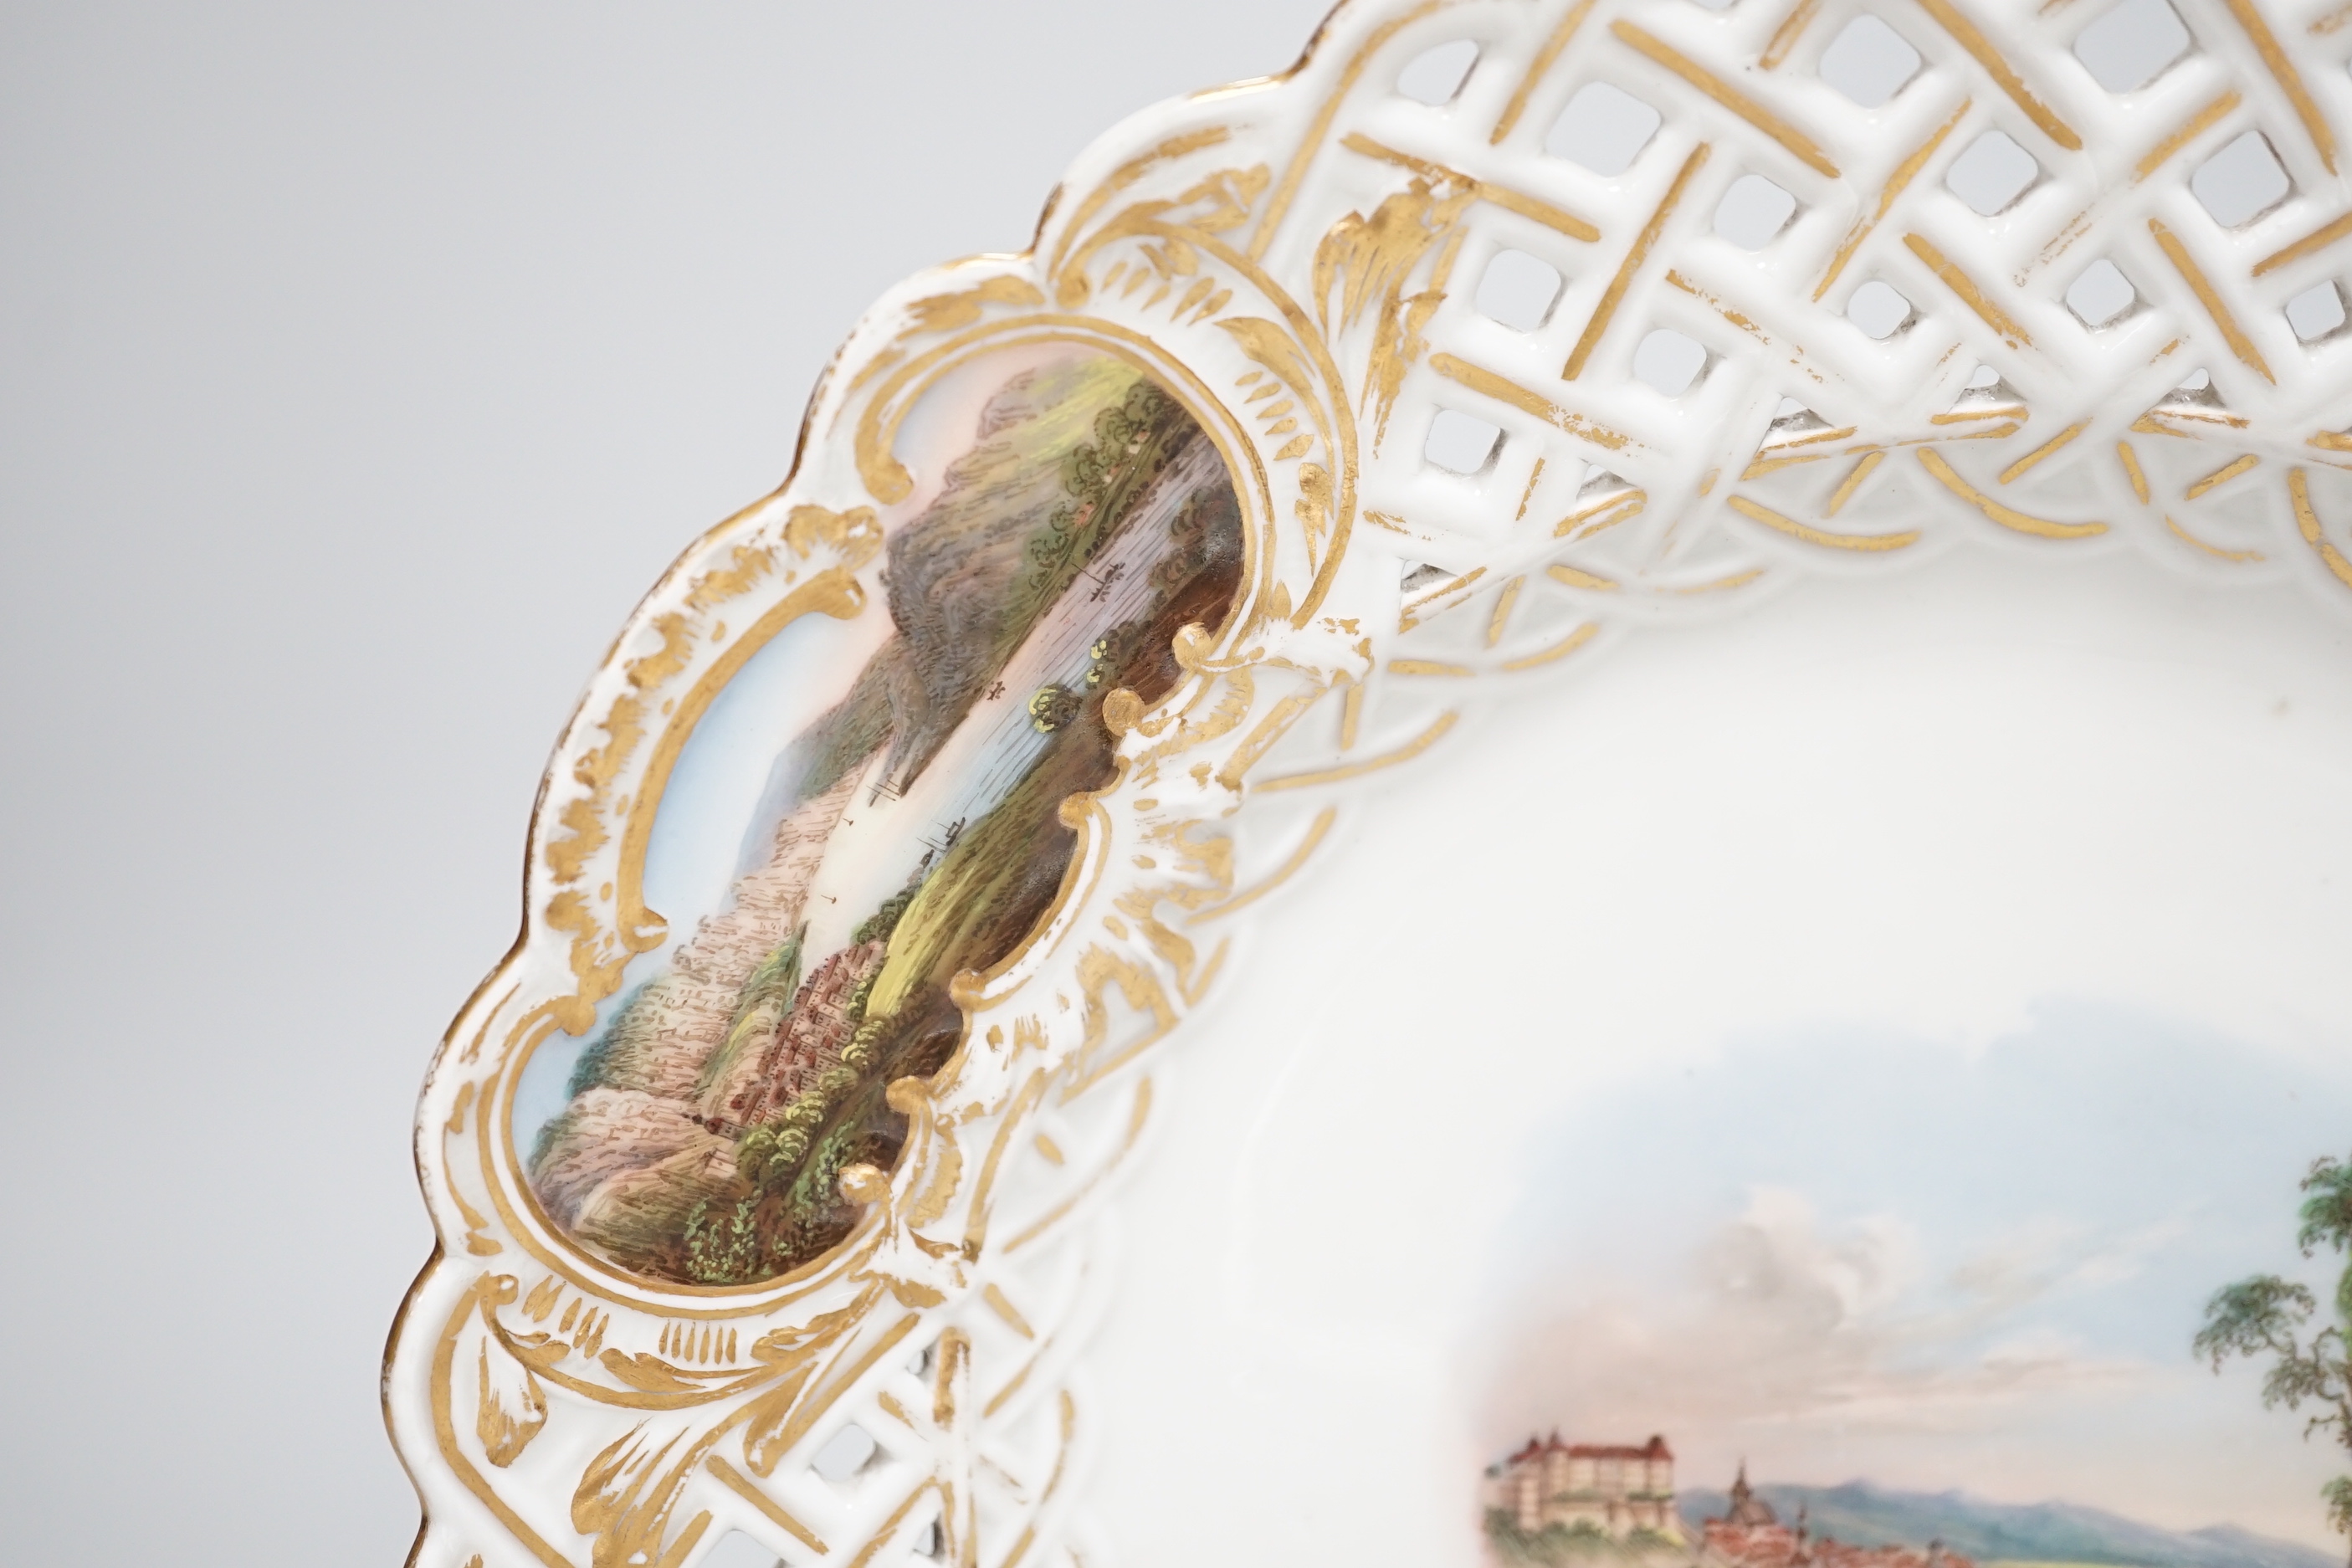 A Meissen topographical reticulated plate, 19th century, painted with named views; Pirna, Wehlstadtel, Weefenstein and Die Lochmukle, 24cm